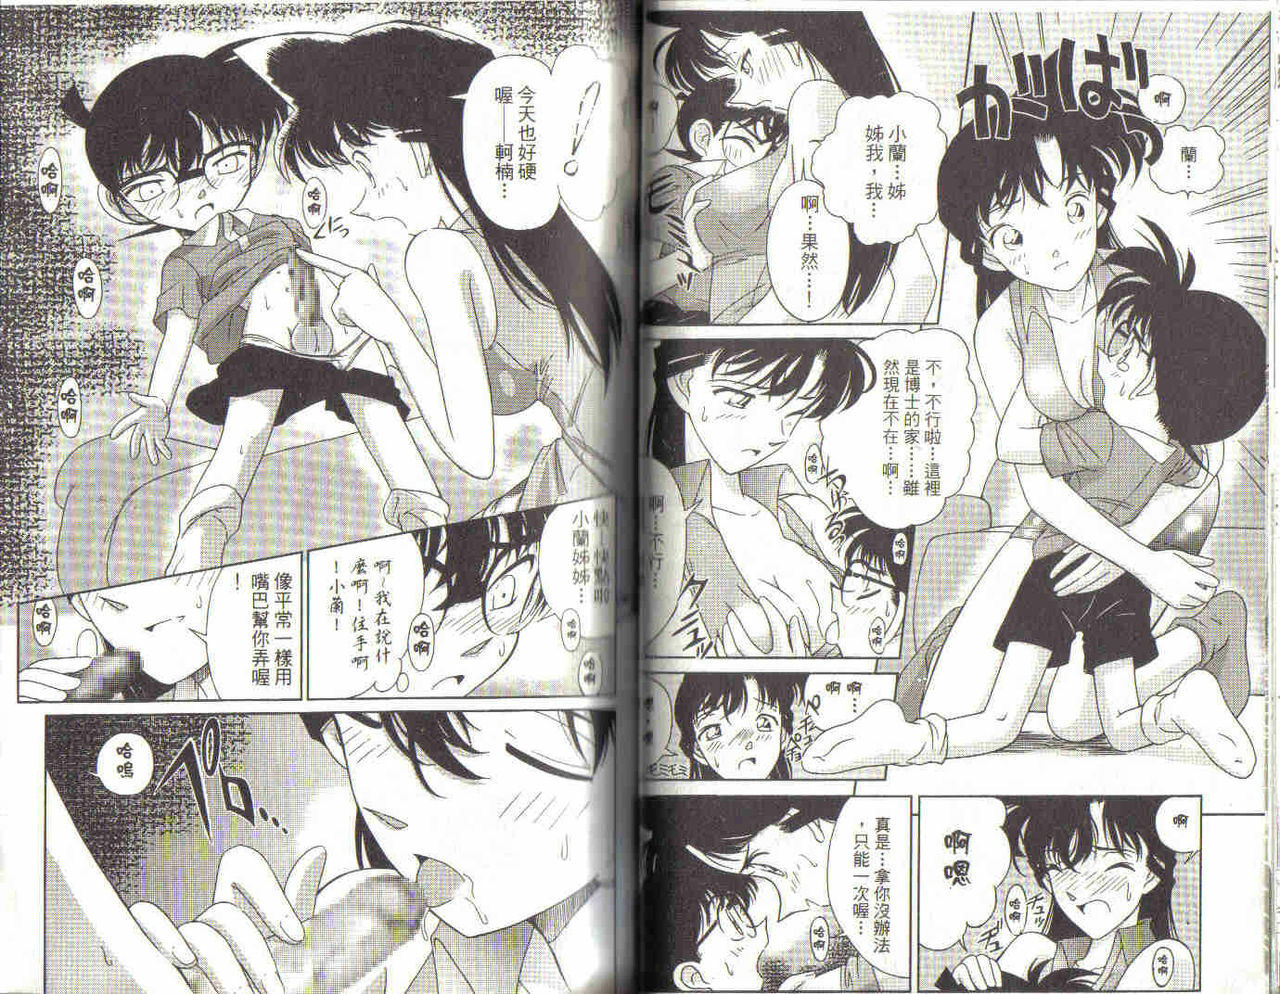 [Ooya Nako] Detective Assistant Vol. 3 (Detective Conan) [Chinese] page 32 full